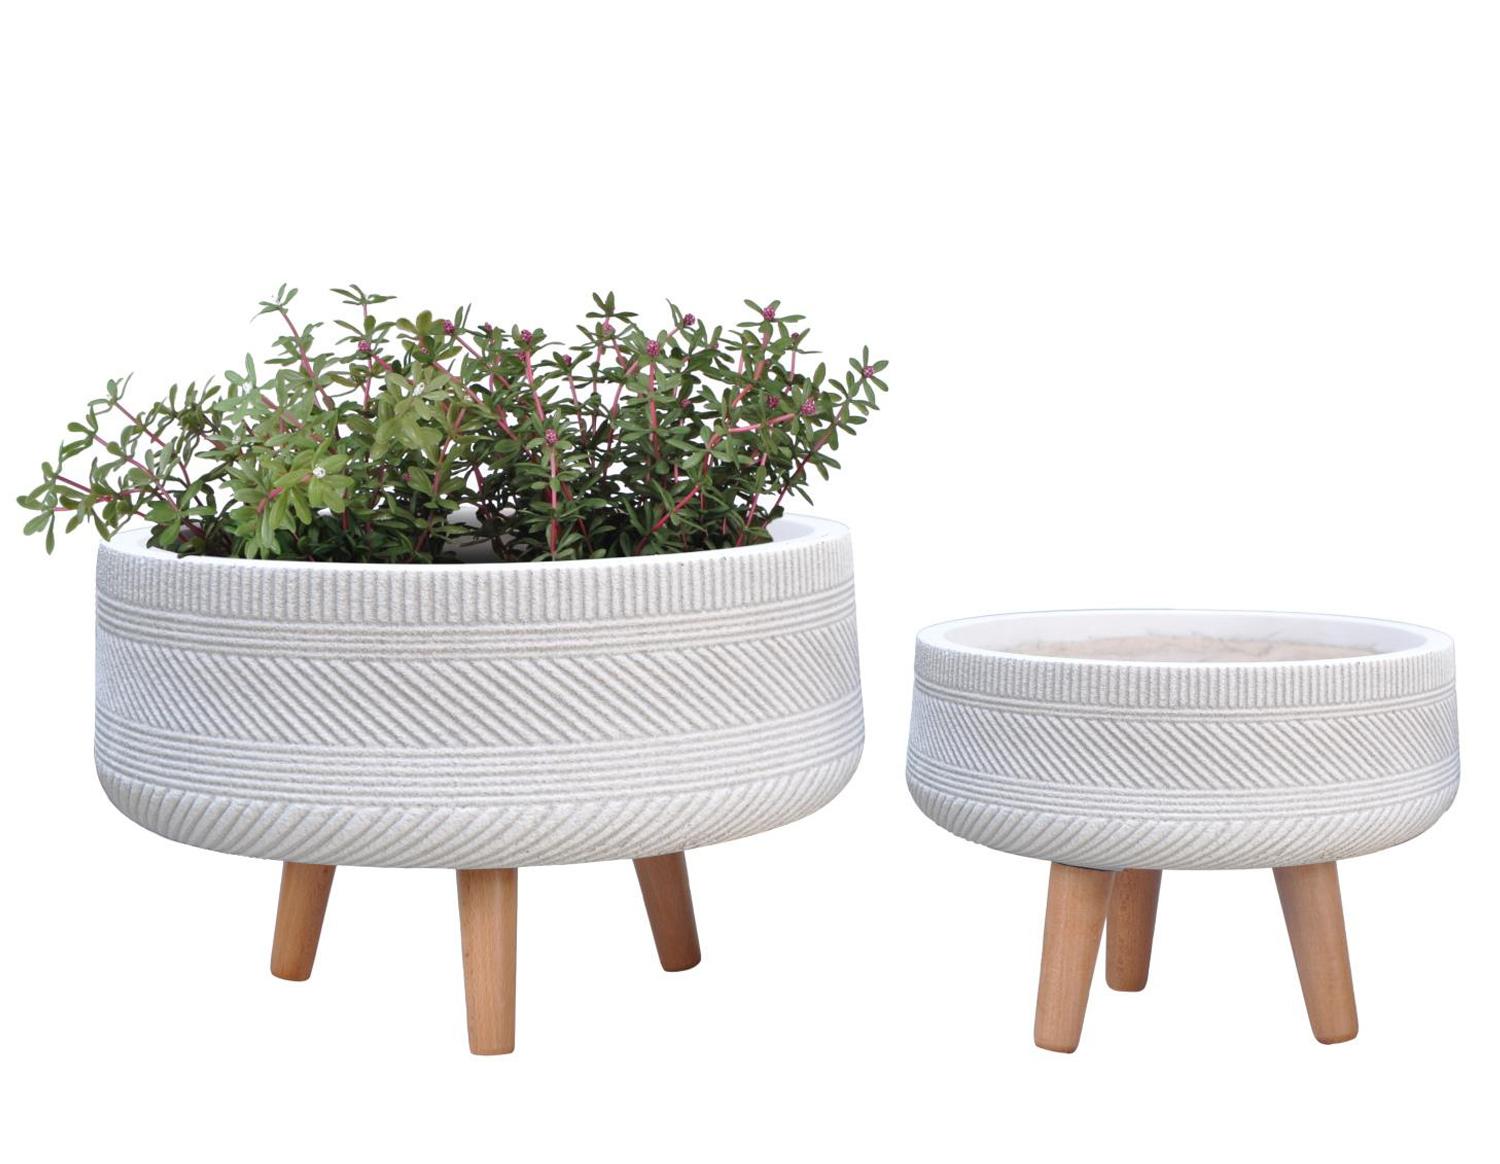 Striped Tray Round Indoor Planter on Legs by Idealist Lite - citiplants.com